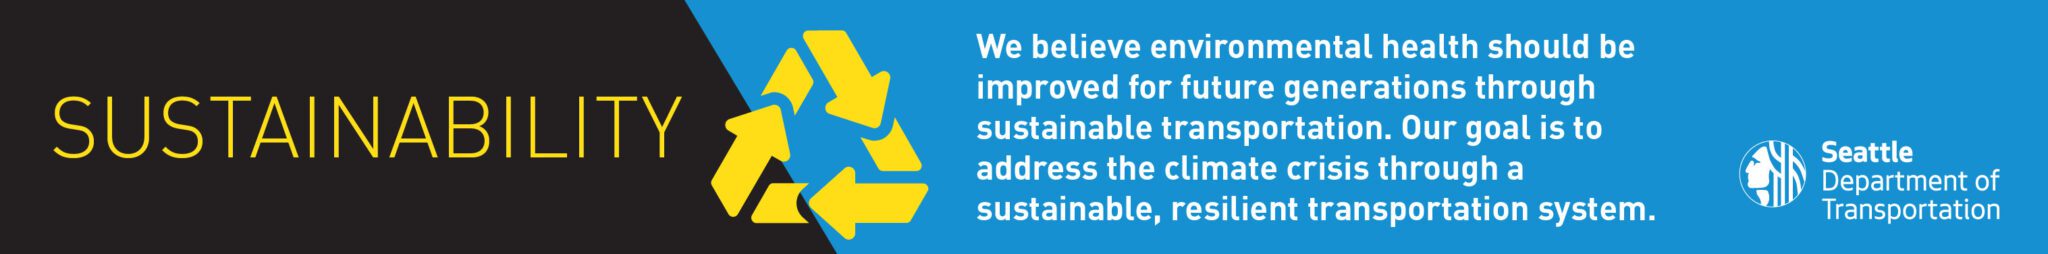 Graphic describing Sustainability as one of SDOT's core values and goals. The graphic has the word Sustainability in large yellow letters, with a recycling icon, text describing the value and goal, and the SDOT logo with a blue and black background.